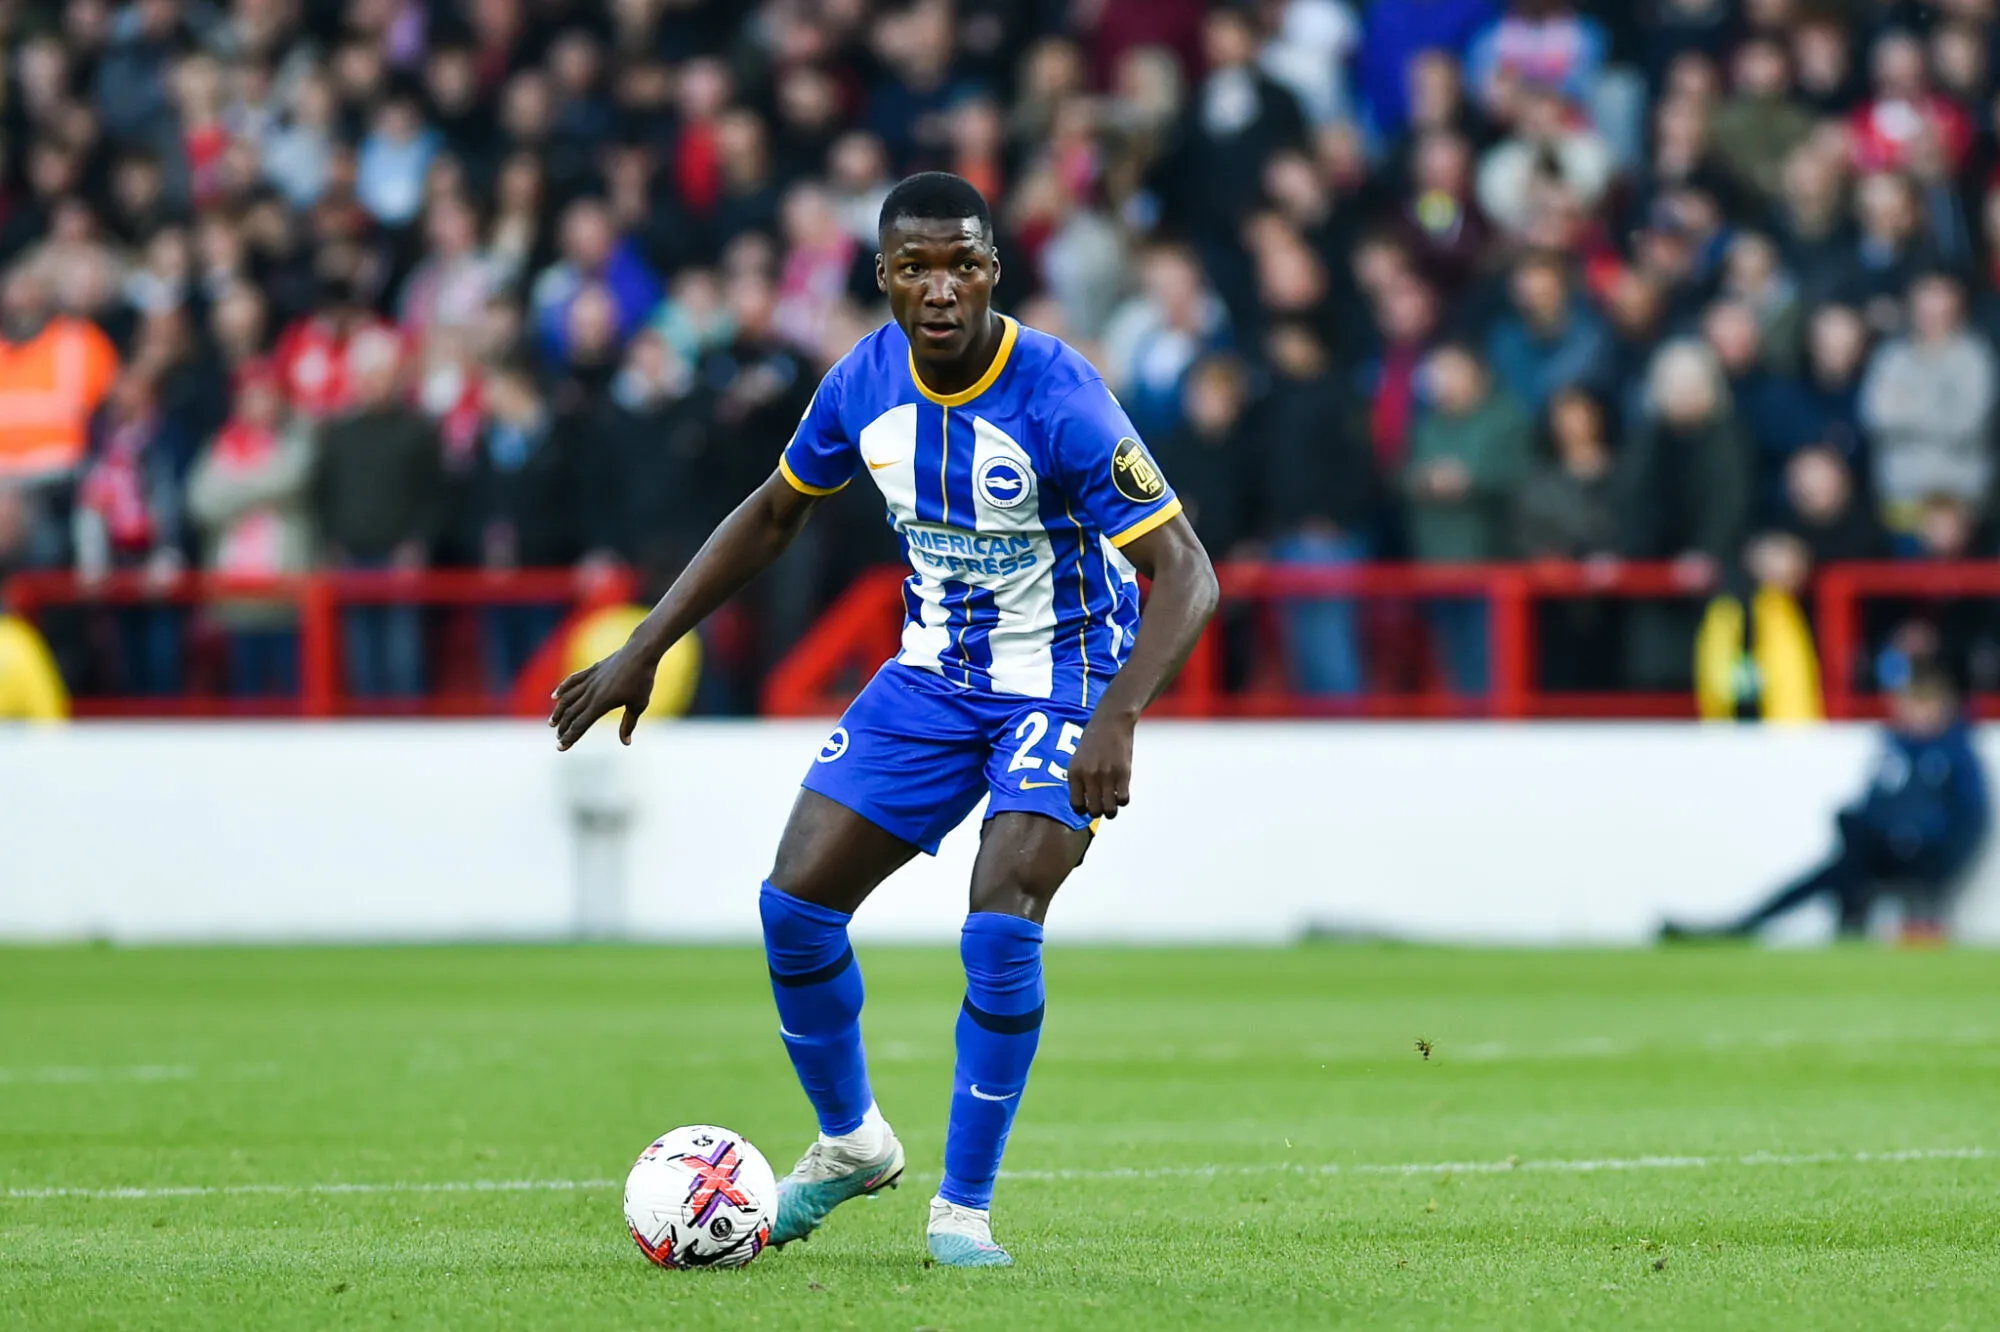 26th April 2023; The City Ground, Nottingham, England; Premier League Football, Nottingham Forest versus Brighton and Hove Albion; Moises Caicedo of Brighton And Hove Albion on the ball - Photo by Icon sport